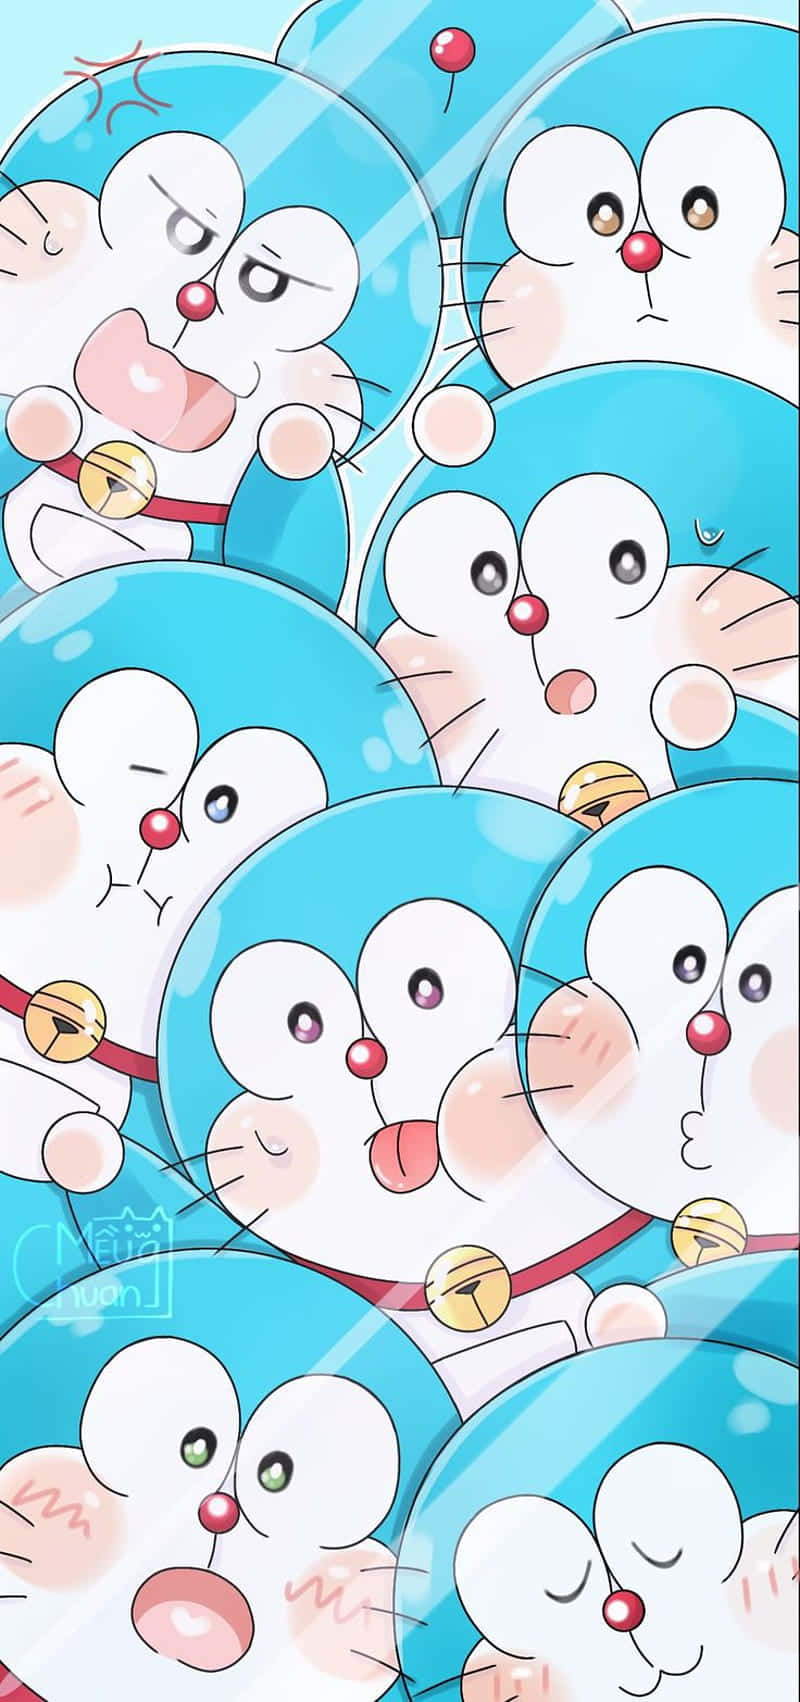 Doraemon - A Group Of Blue And White Cartoon Characters Wallpaper